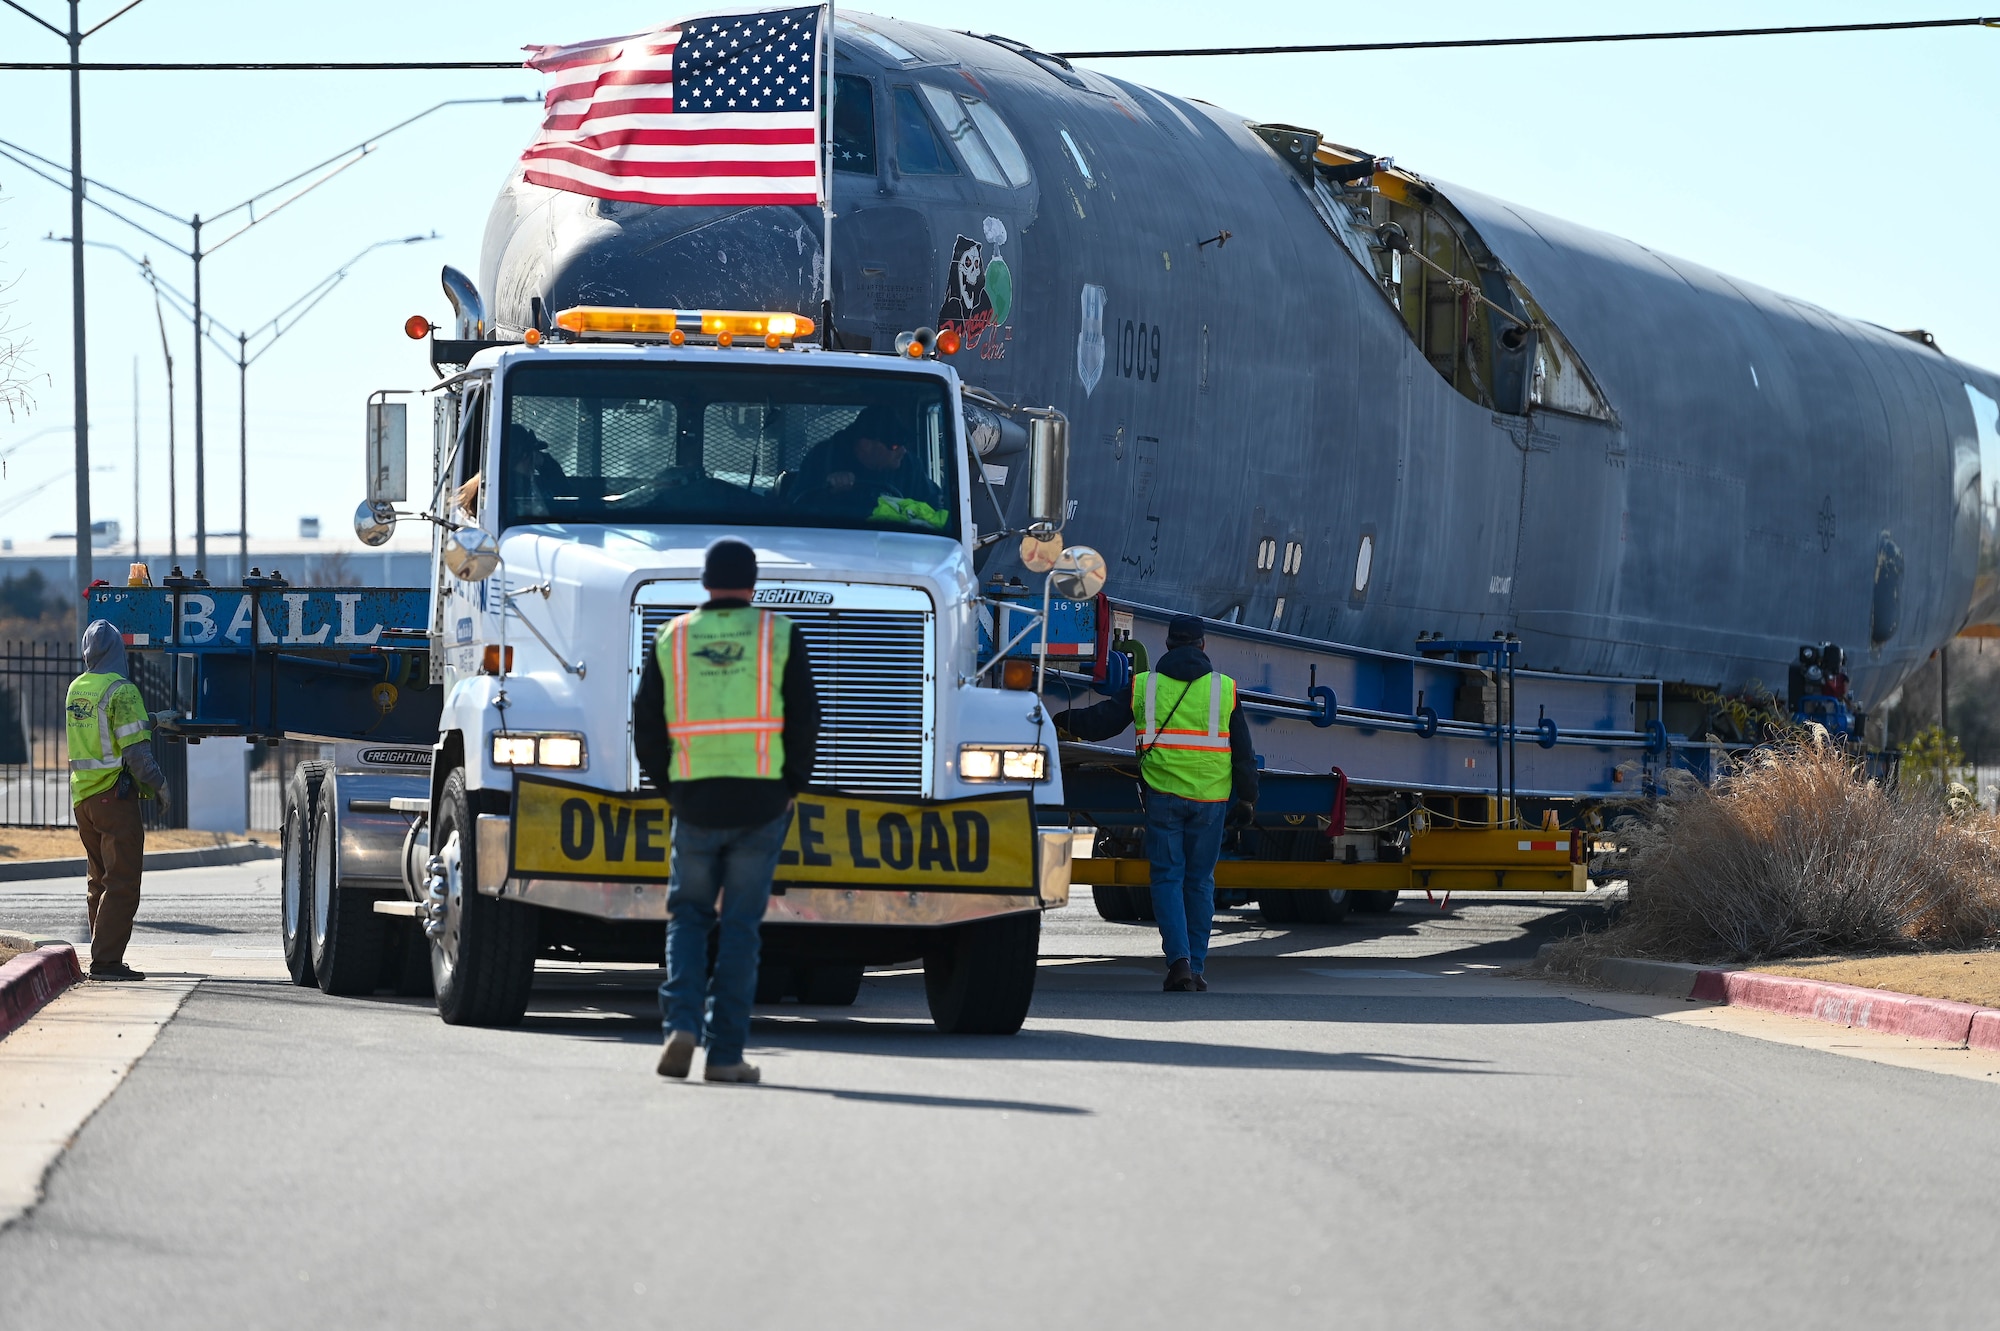 Truck carrying aircraft fuselage